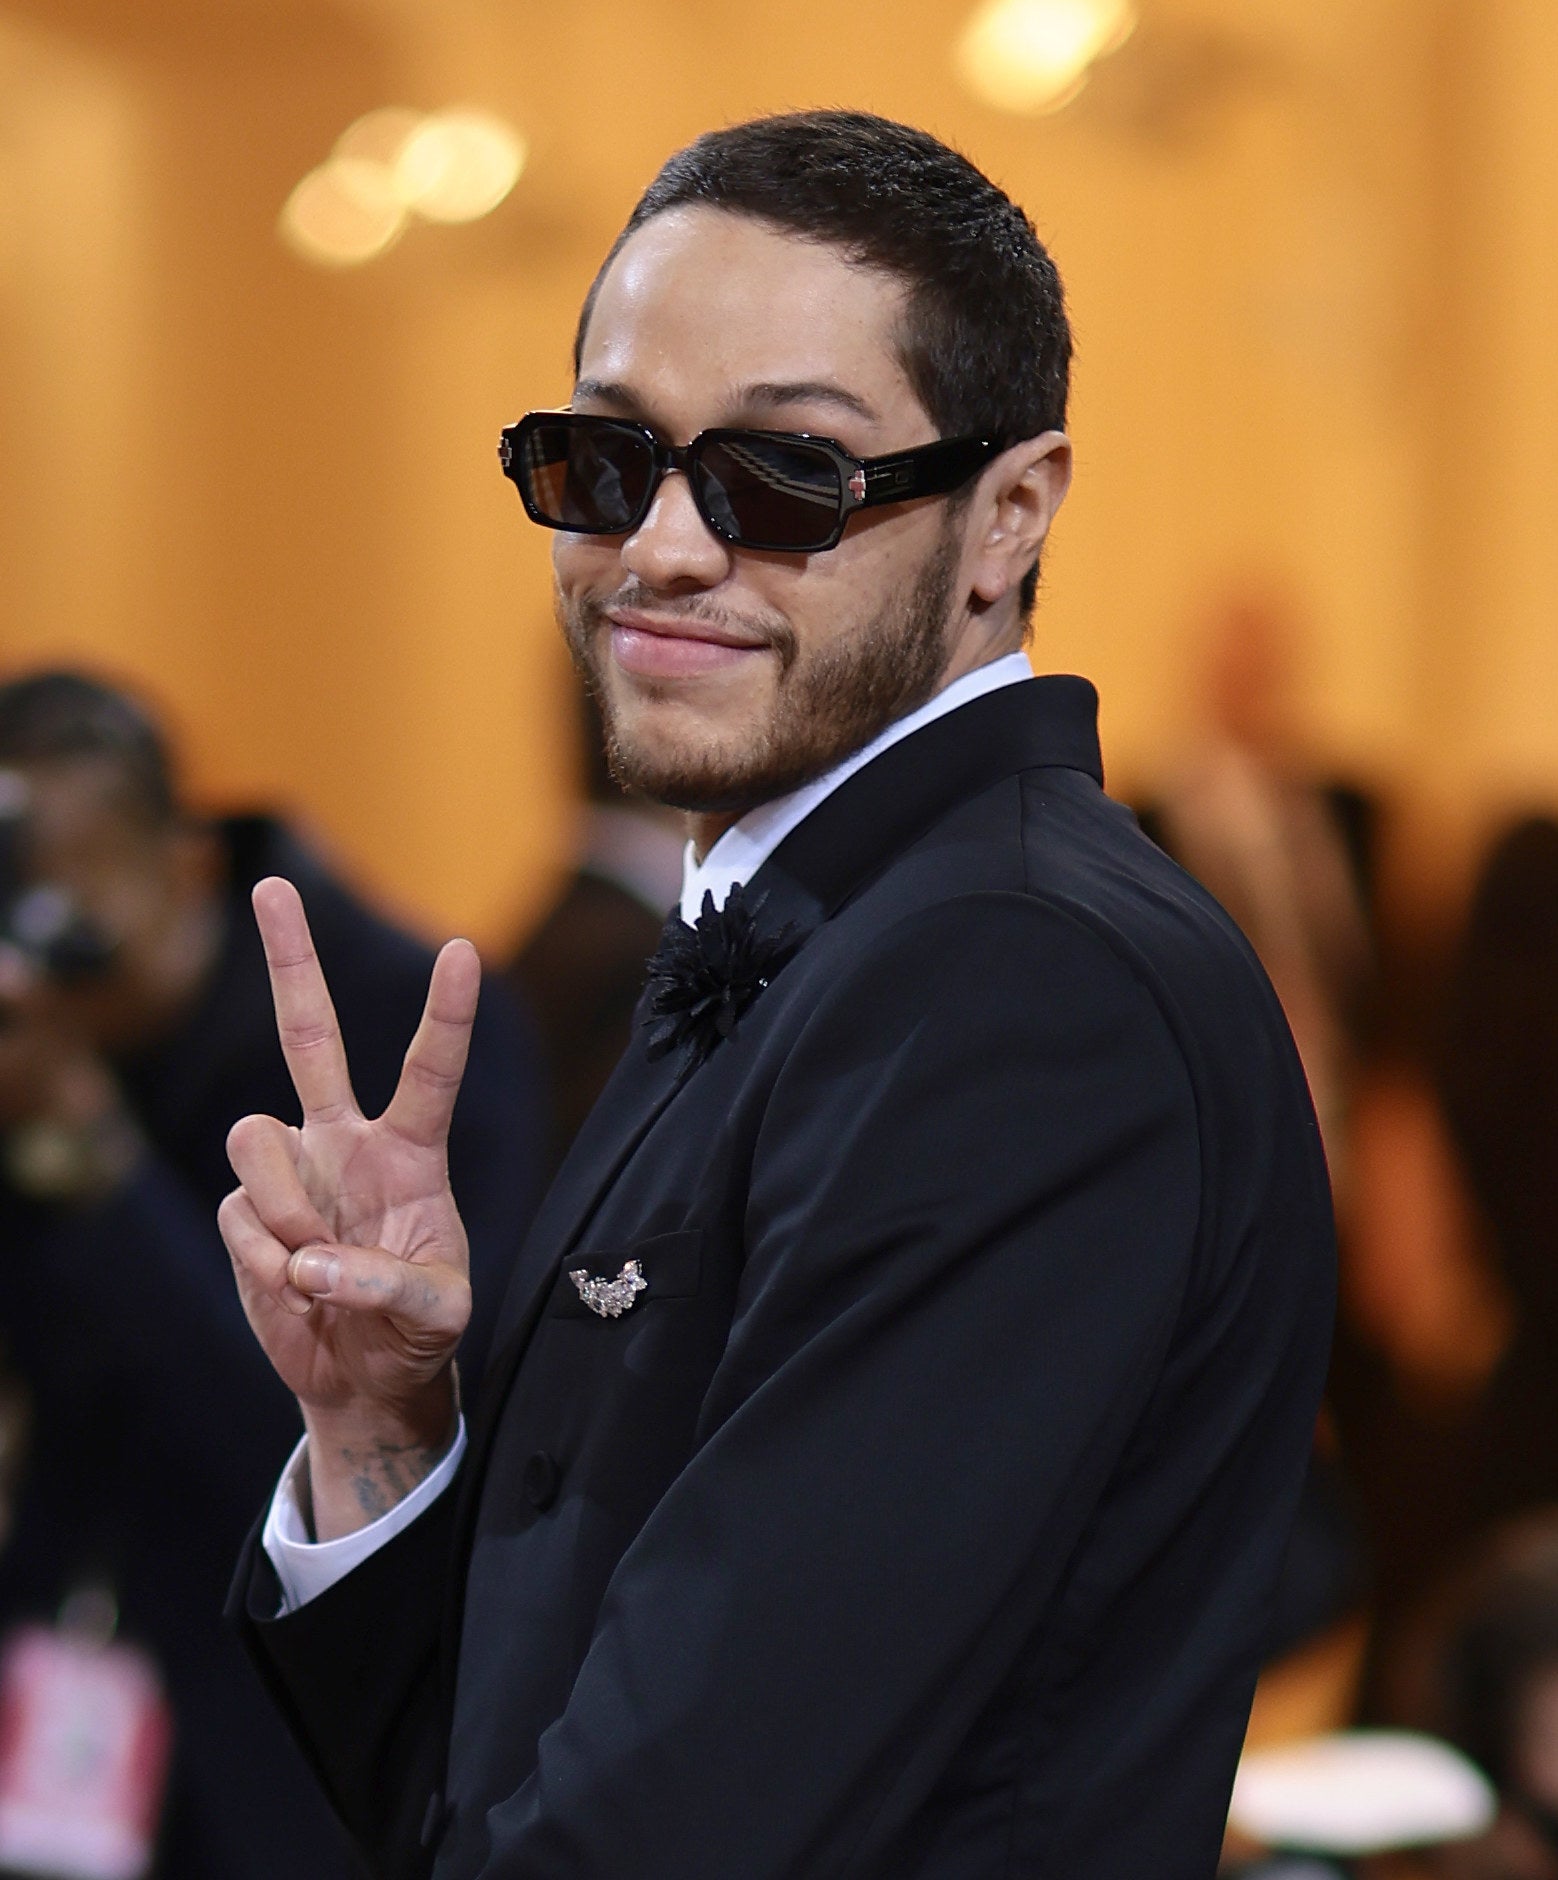 Pete giving the peace sign and wearing sunglasses